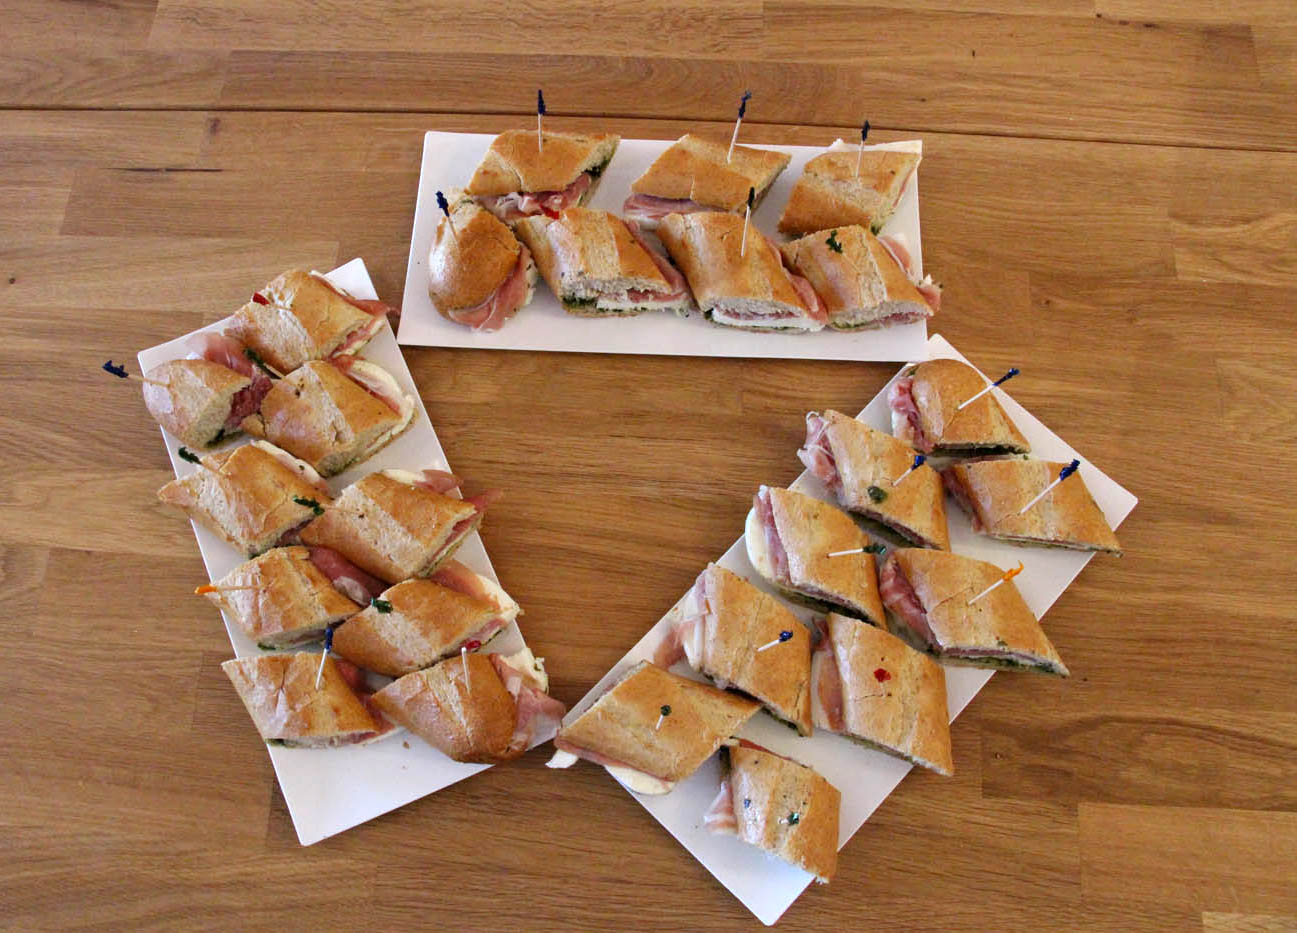 Prosciutto and mozzarella cheese snacks at The Real Food Academy.